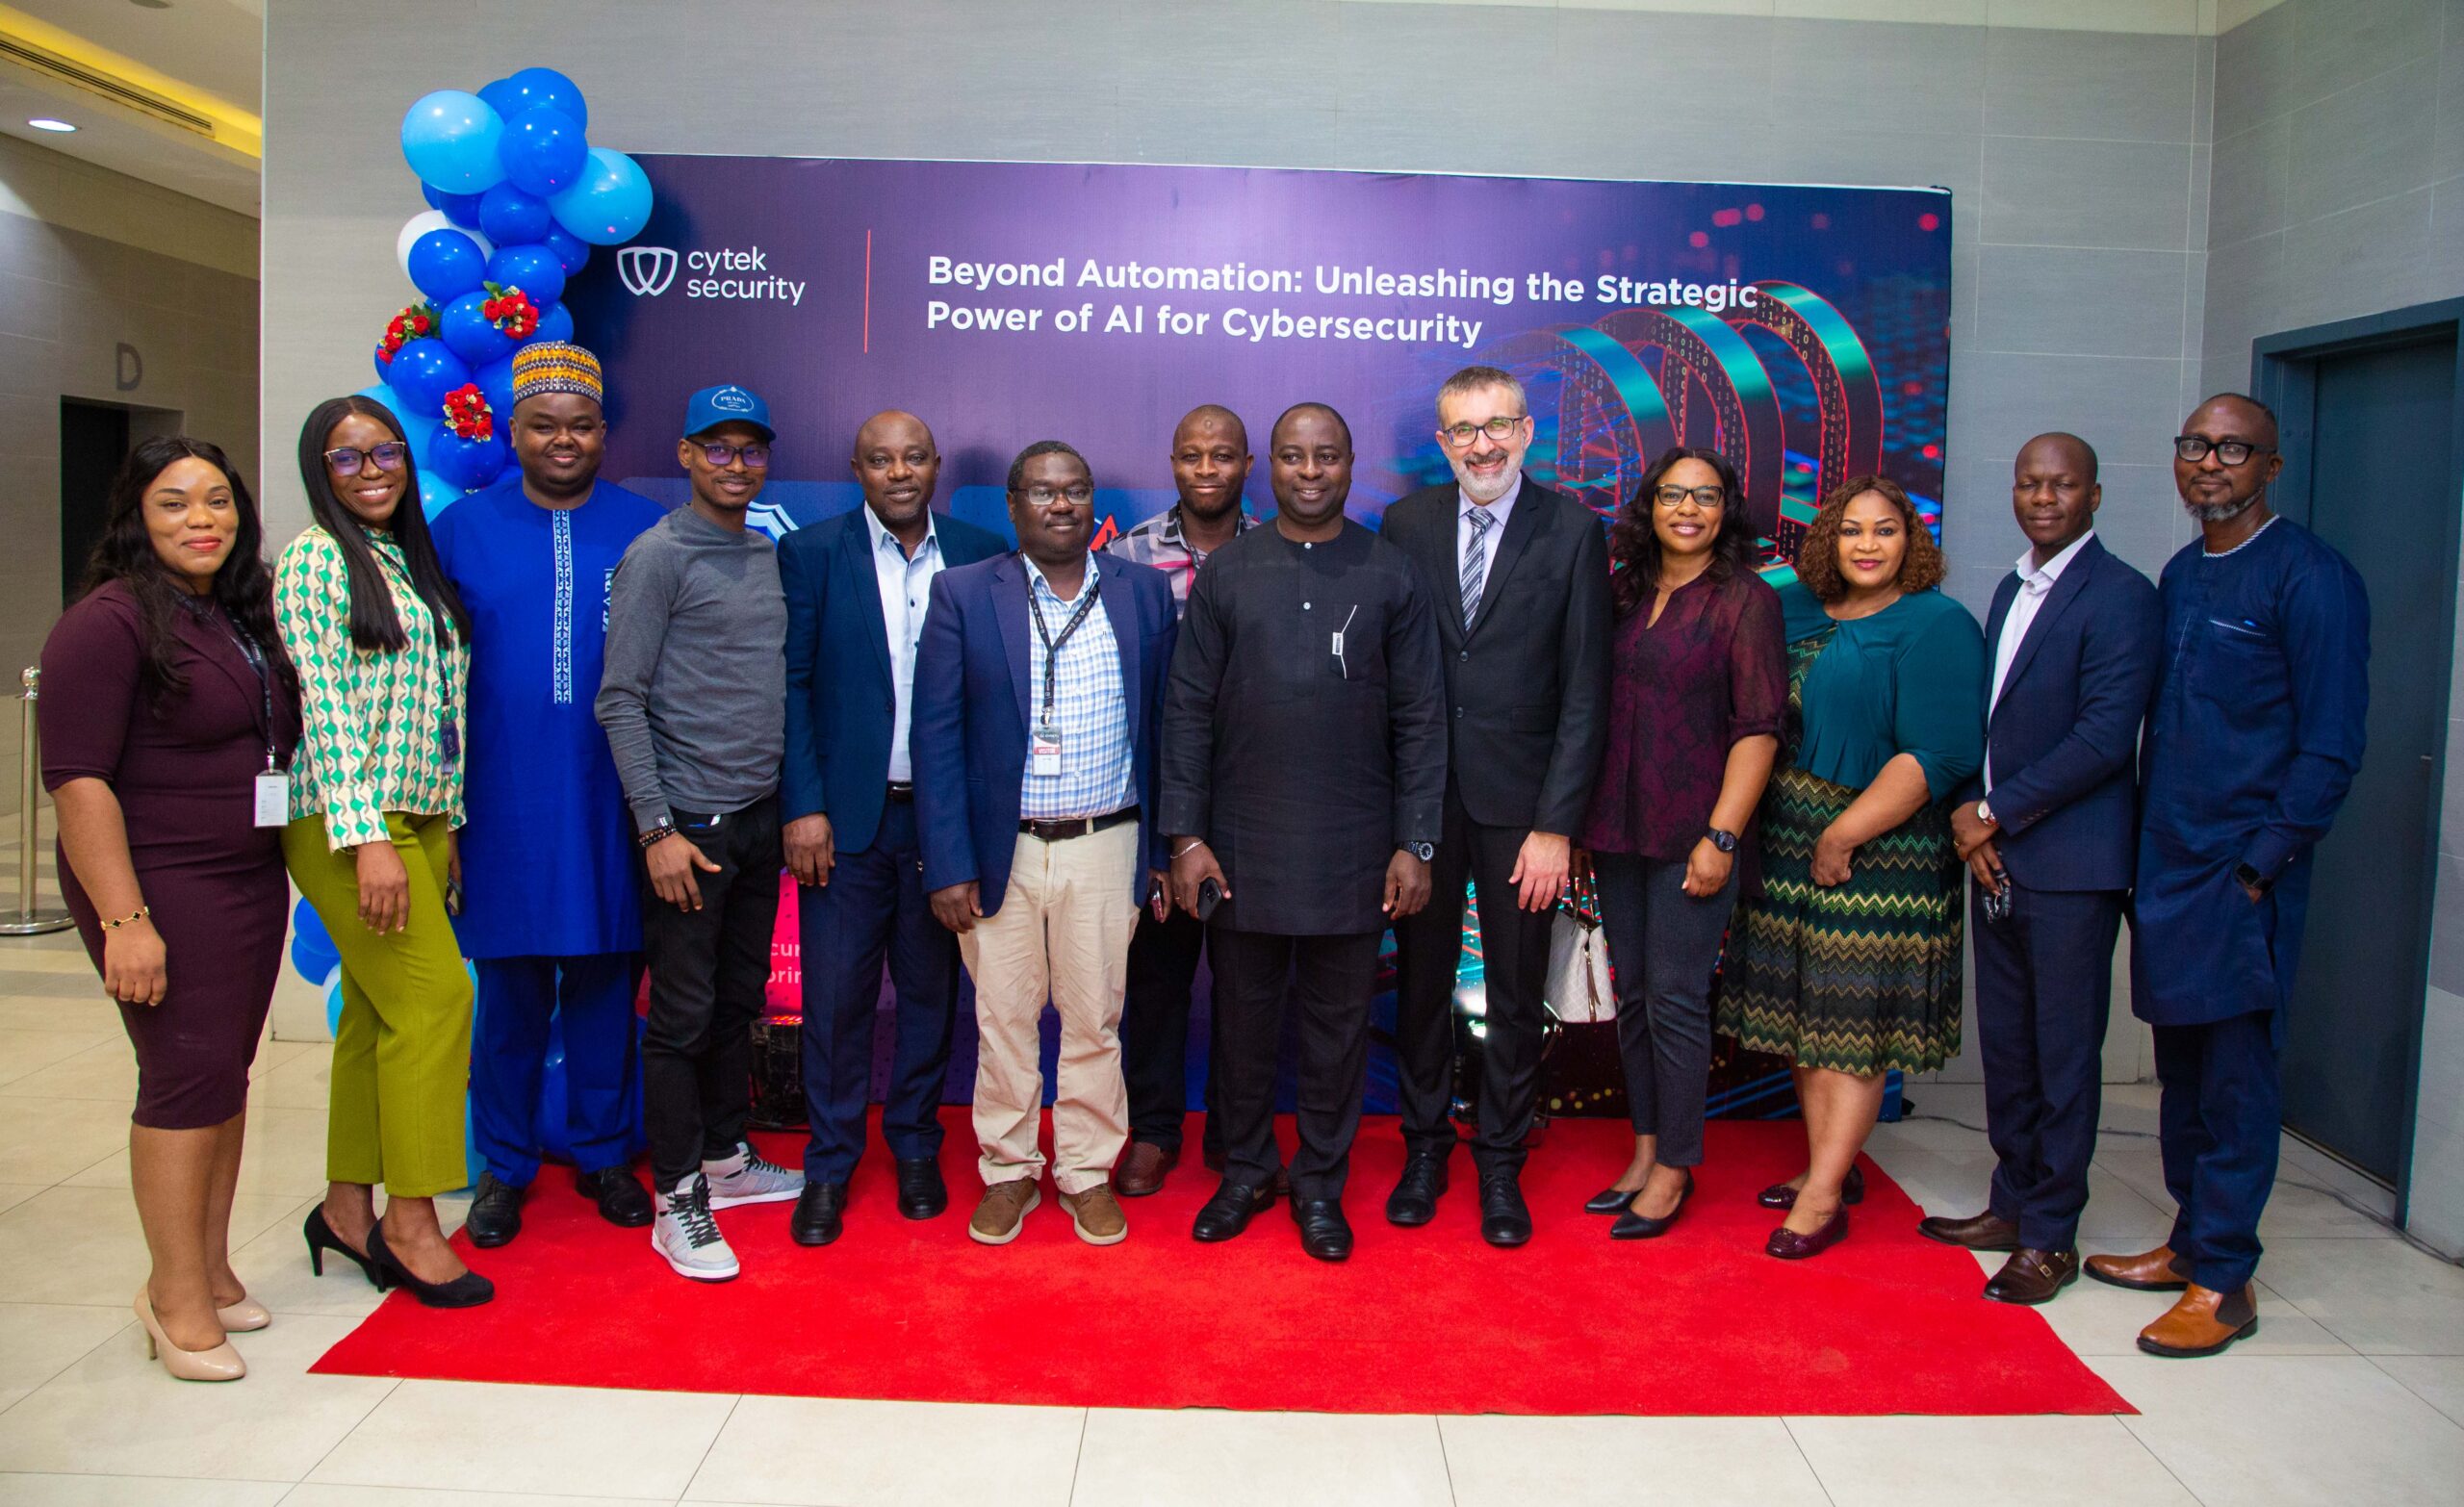 Featured image for article titled "Beyond Automation – Unleashing the Strategic Power of AI for Cybersecurity" showing the attendees of the event during a tour of Cytek's Security Operations Center in Lagos, Nigeria.